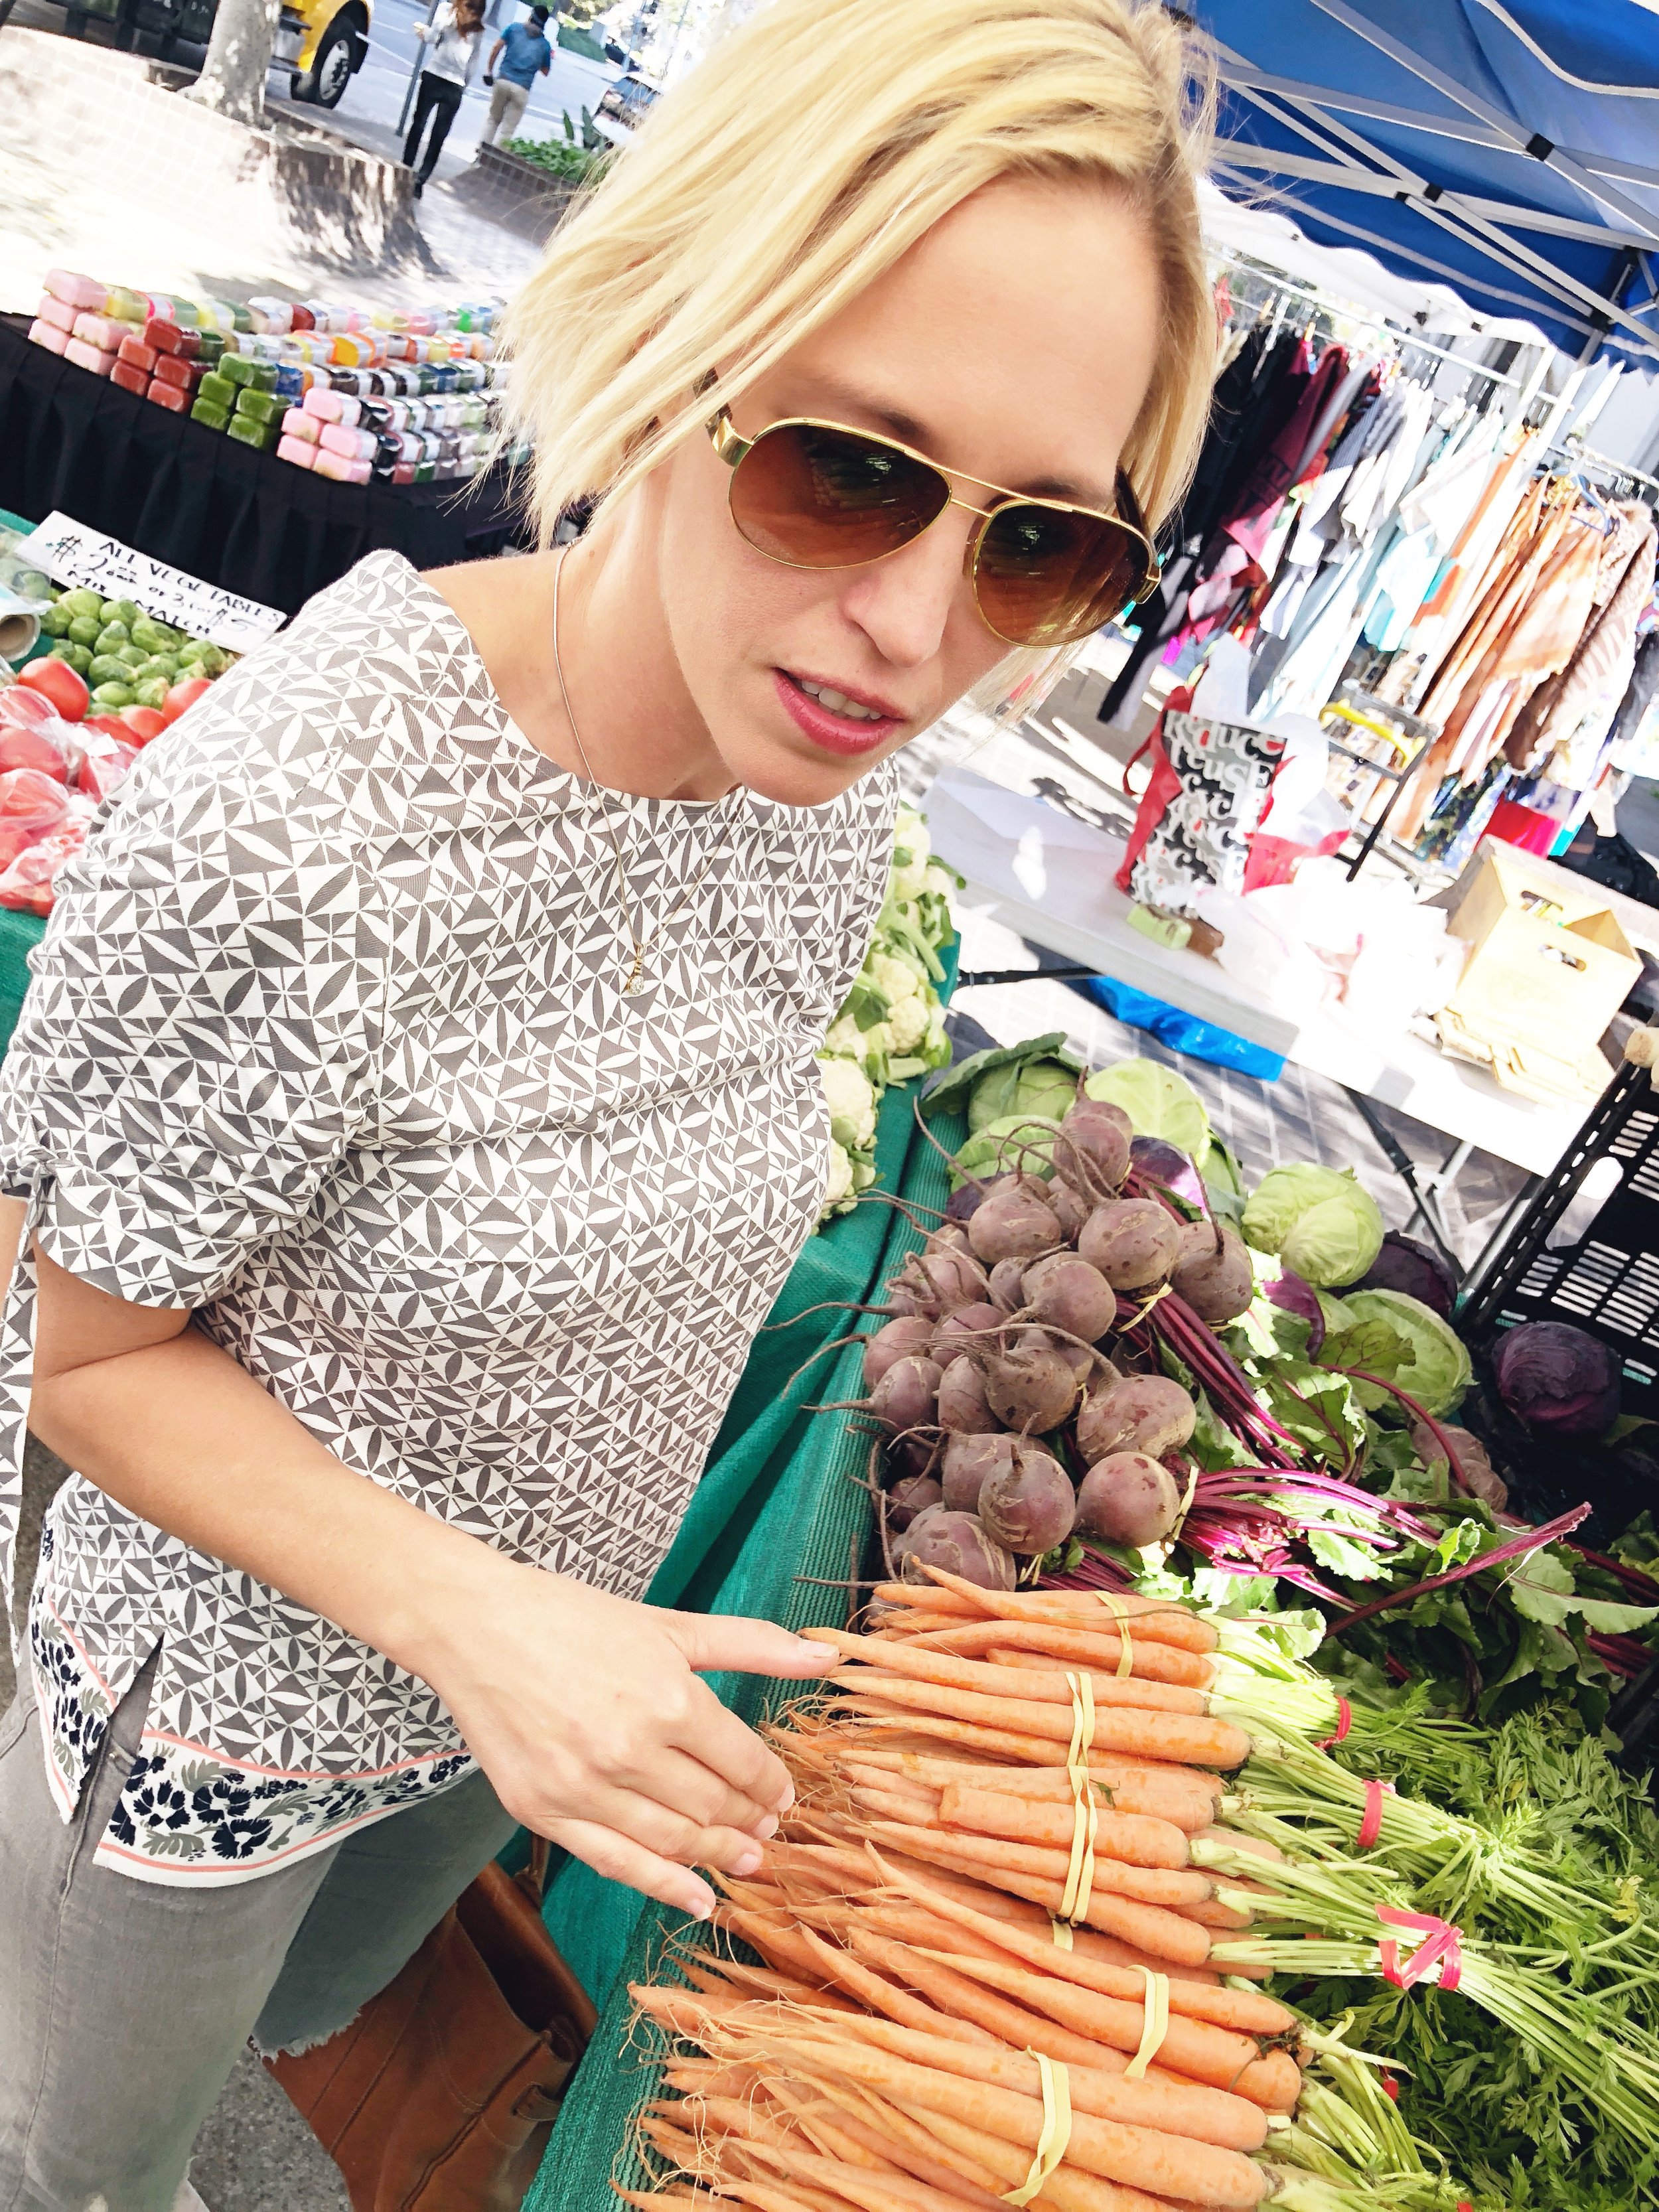 Kerstin explains what she looks for in shopping for fruits and vegetables during a trip to a Farmer's Market in Downtown Los Angeles.